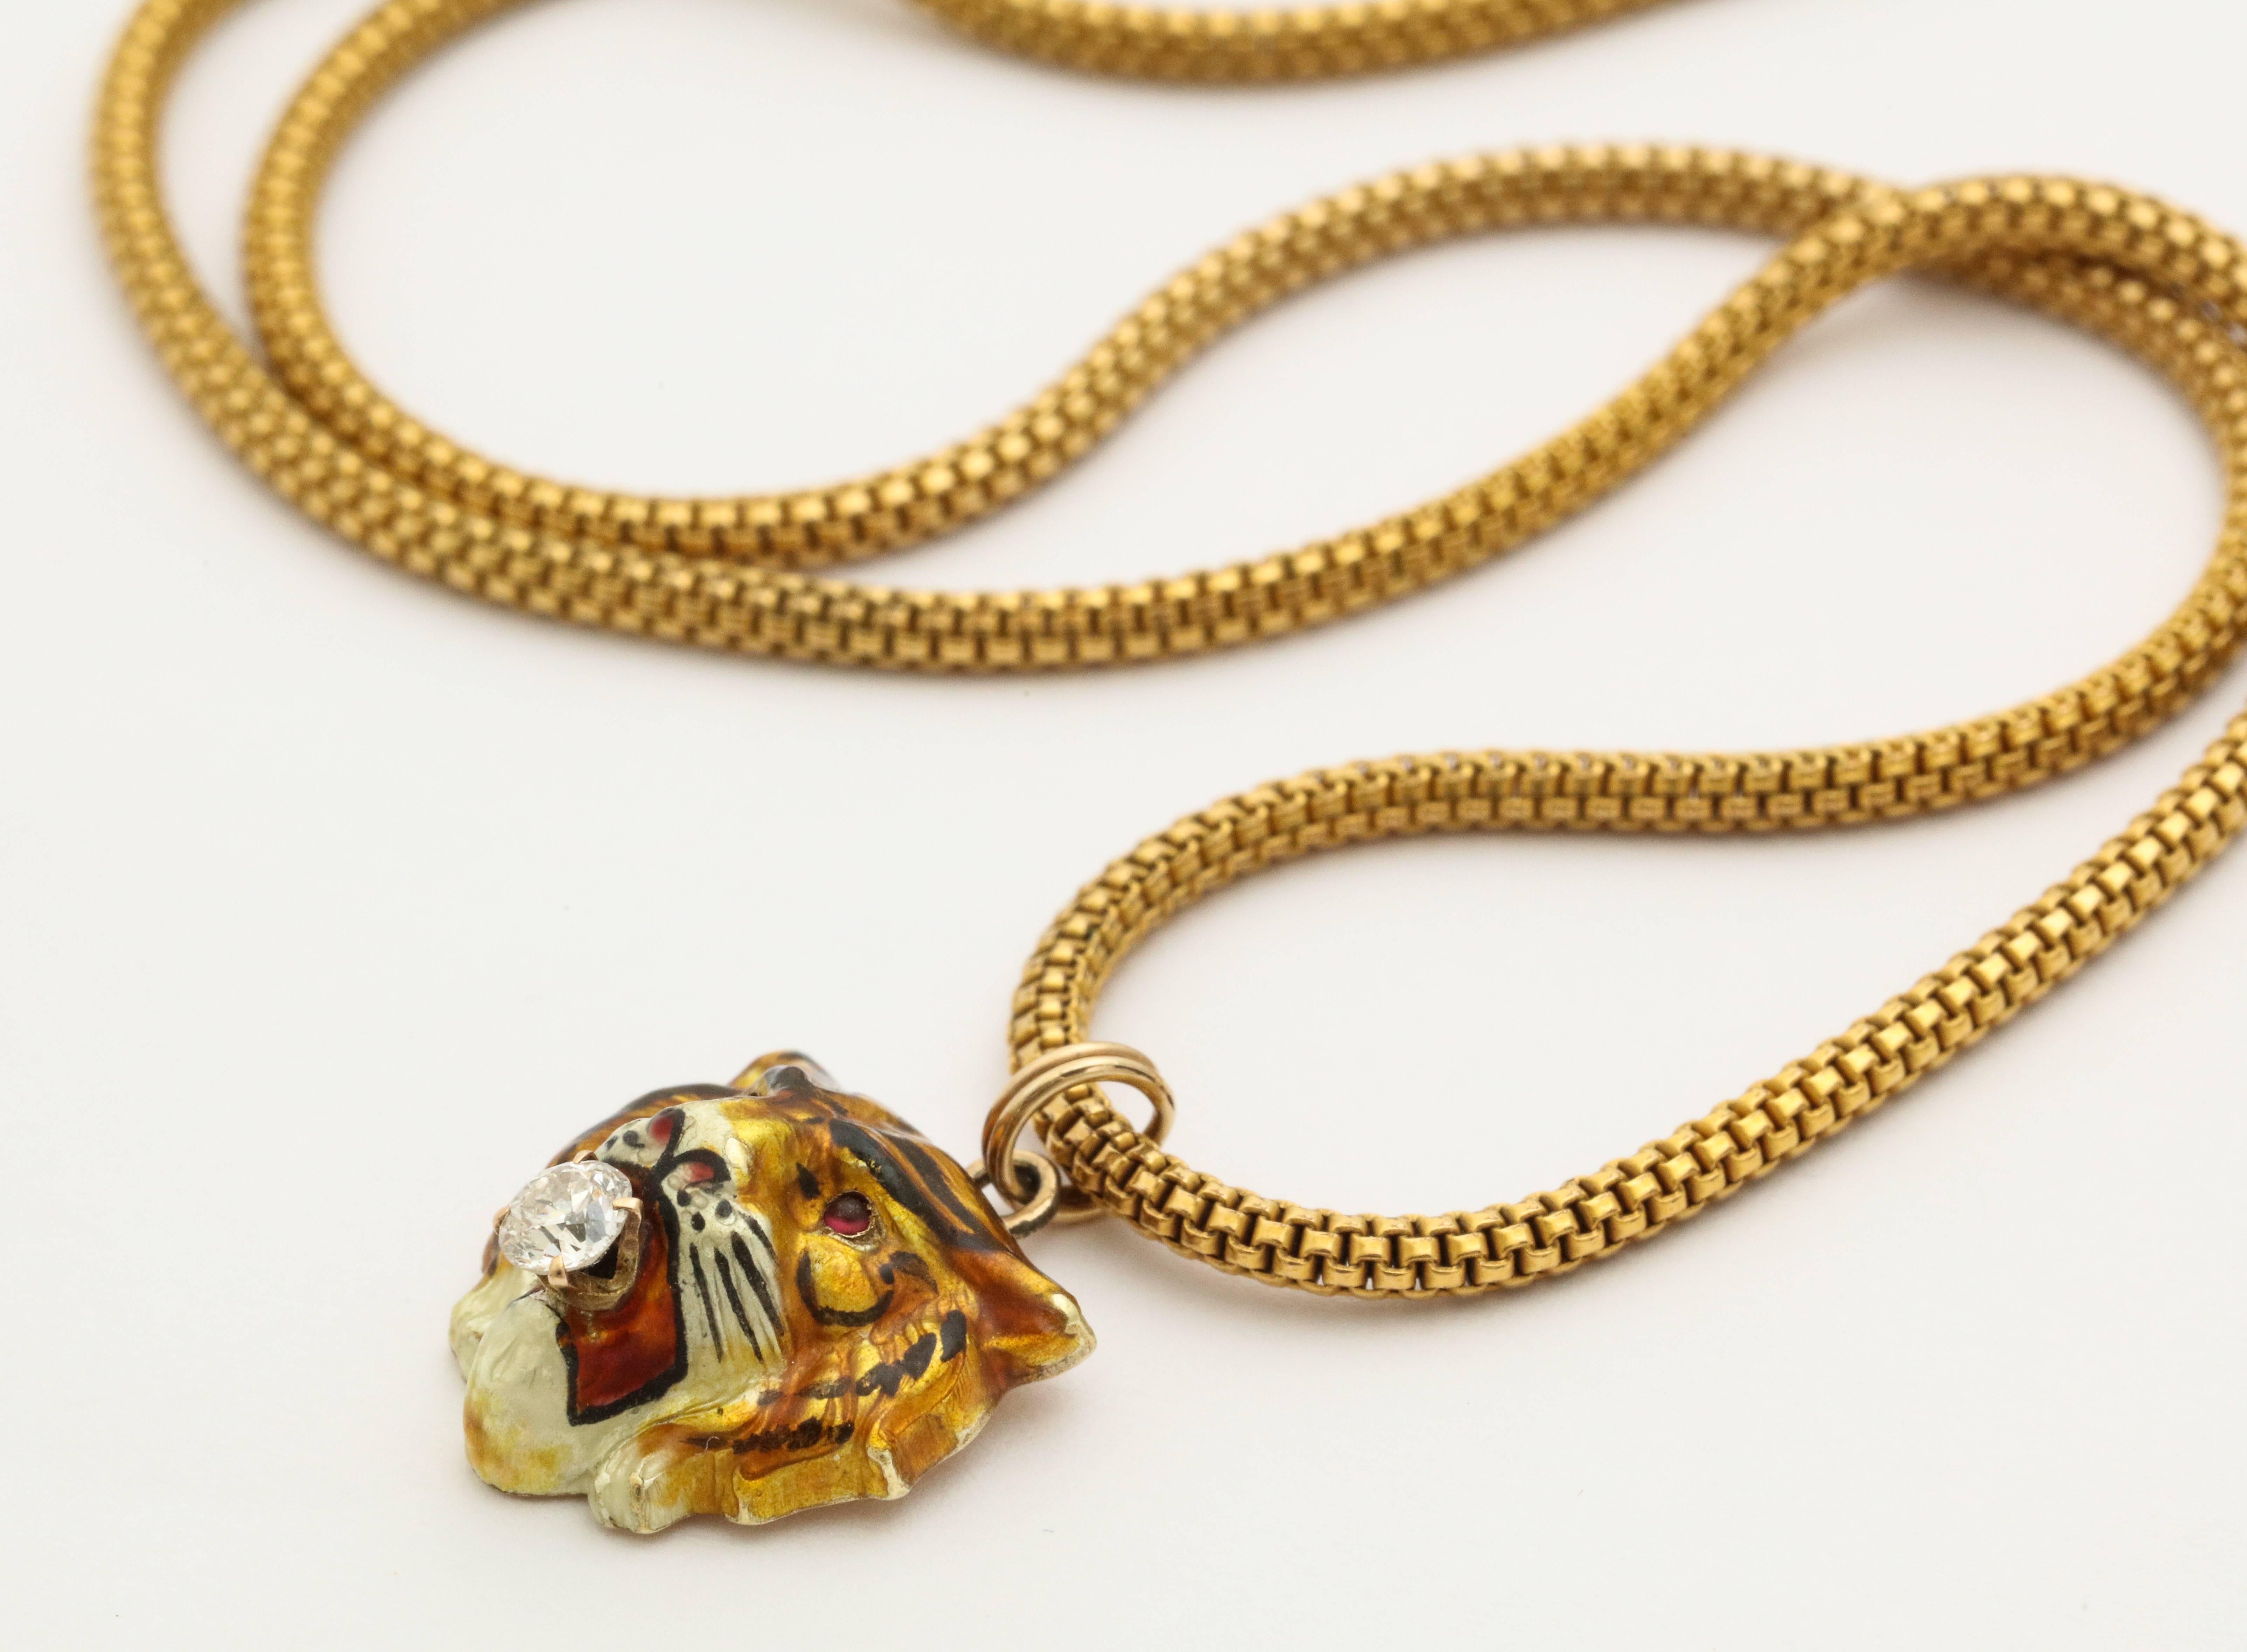 A detailed hand painted enamel tiger 18 kt gold pendant with ruby eyes and a diamond in its mouth on a 18 kt gold chain. Tiger head is 0.5